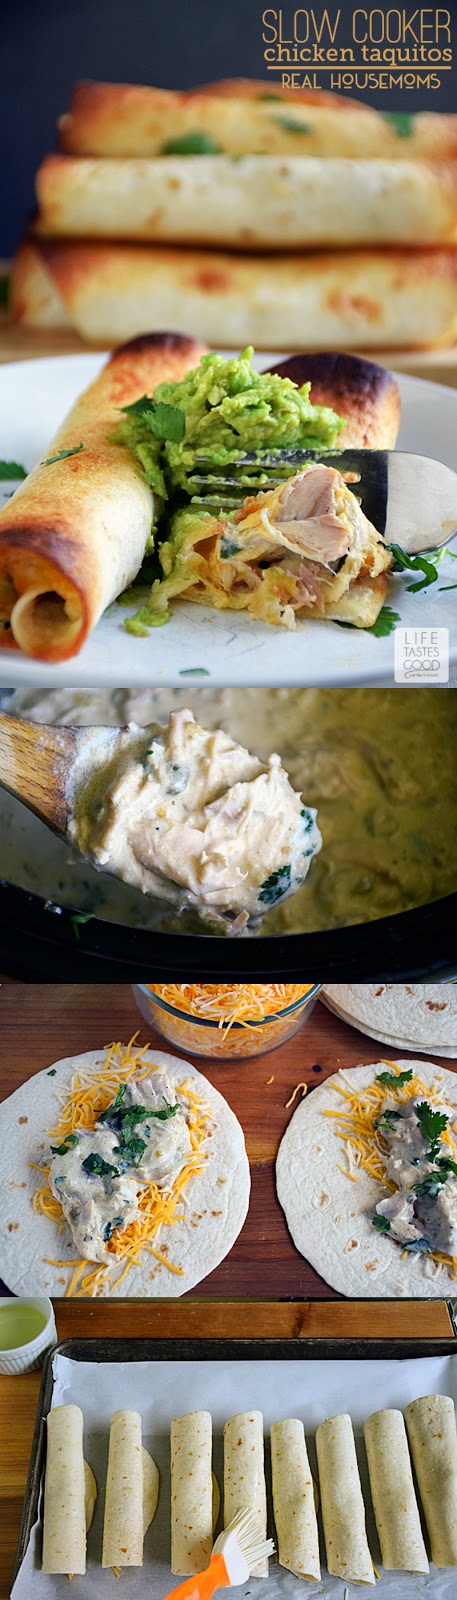 Slow Cooker Chicken Taquitos | by Life Tastes Good is very easy to make any night of the week. The creamy, cheesy filling with just the right amount of spiciness all wrapped up in a crunchy tortilla makes this one of my very favorite slow cooker meals.